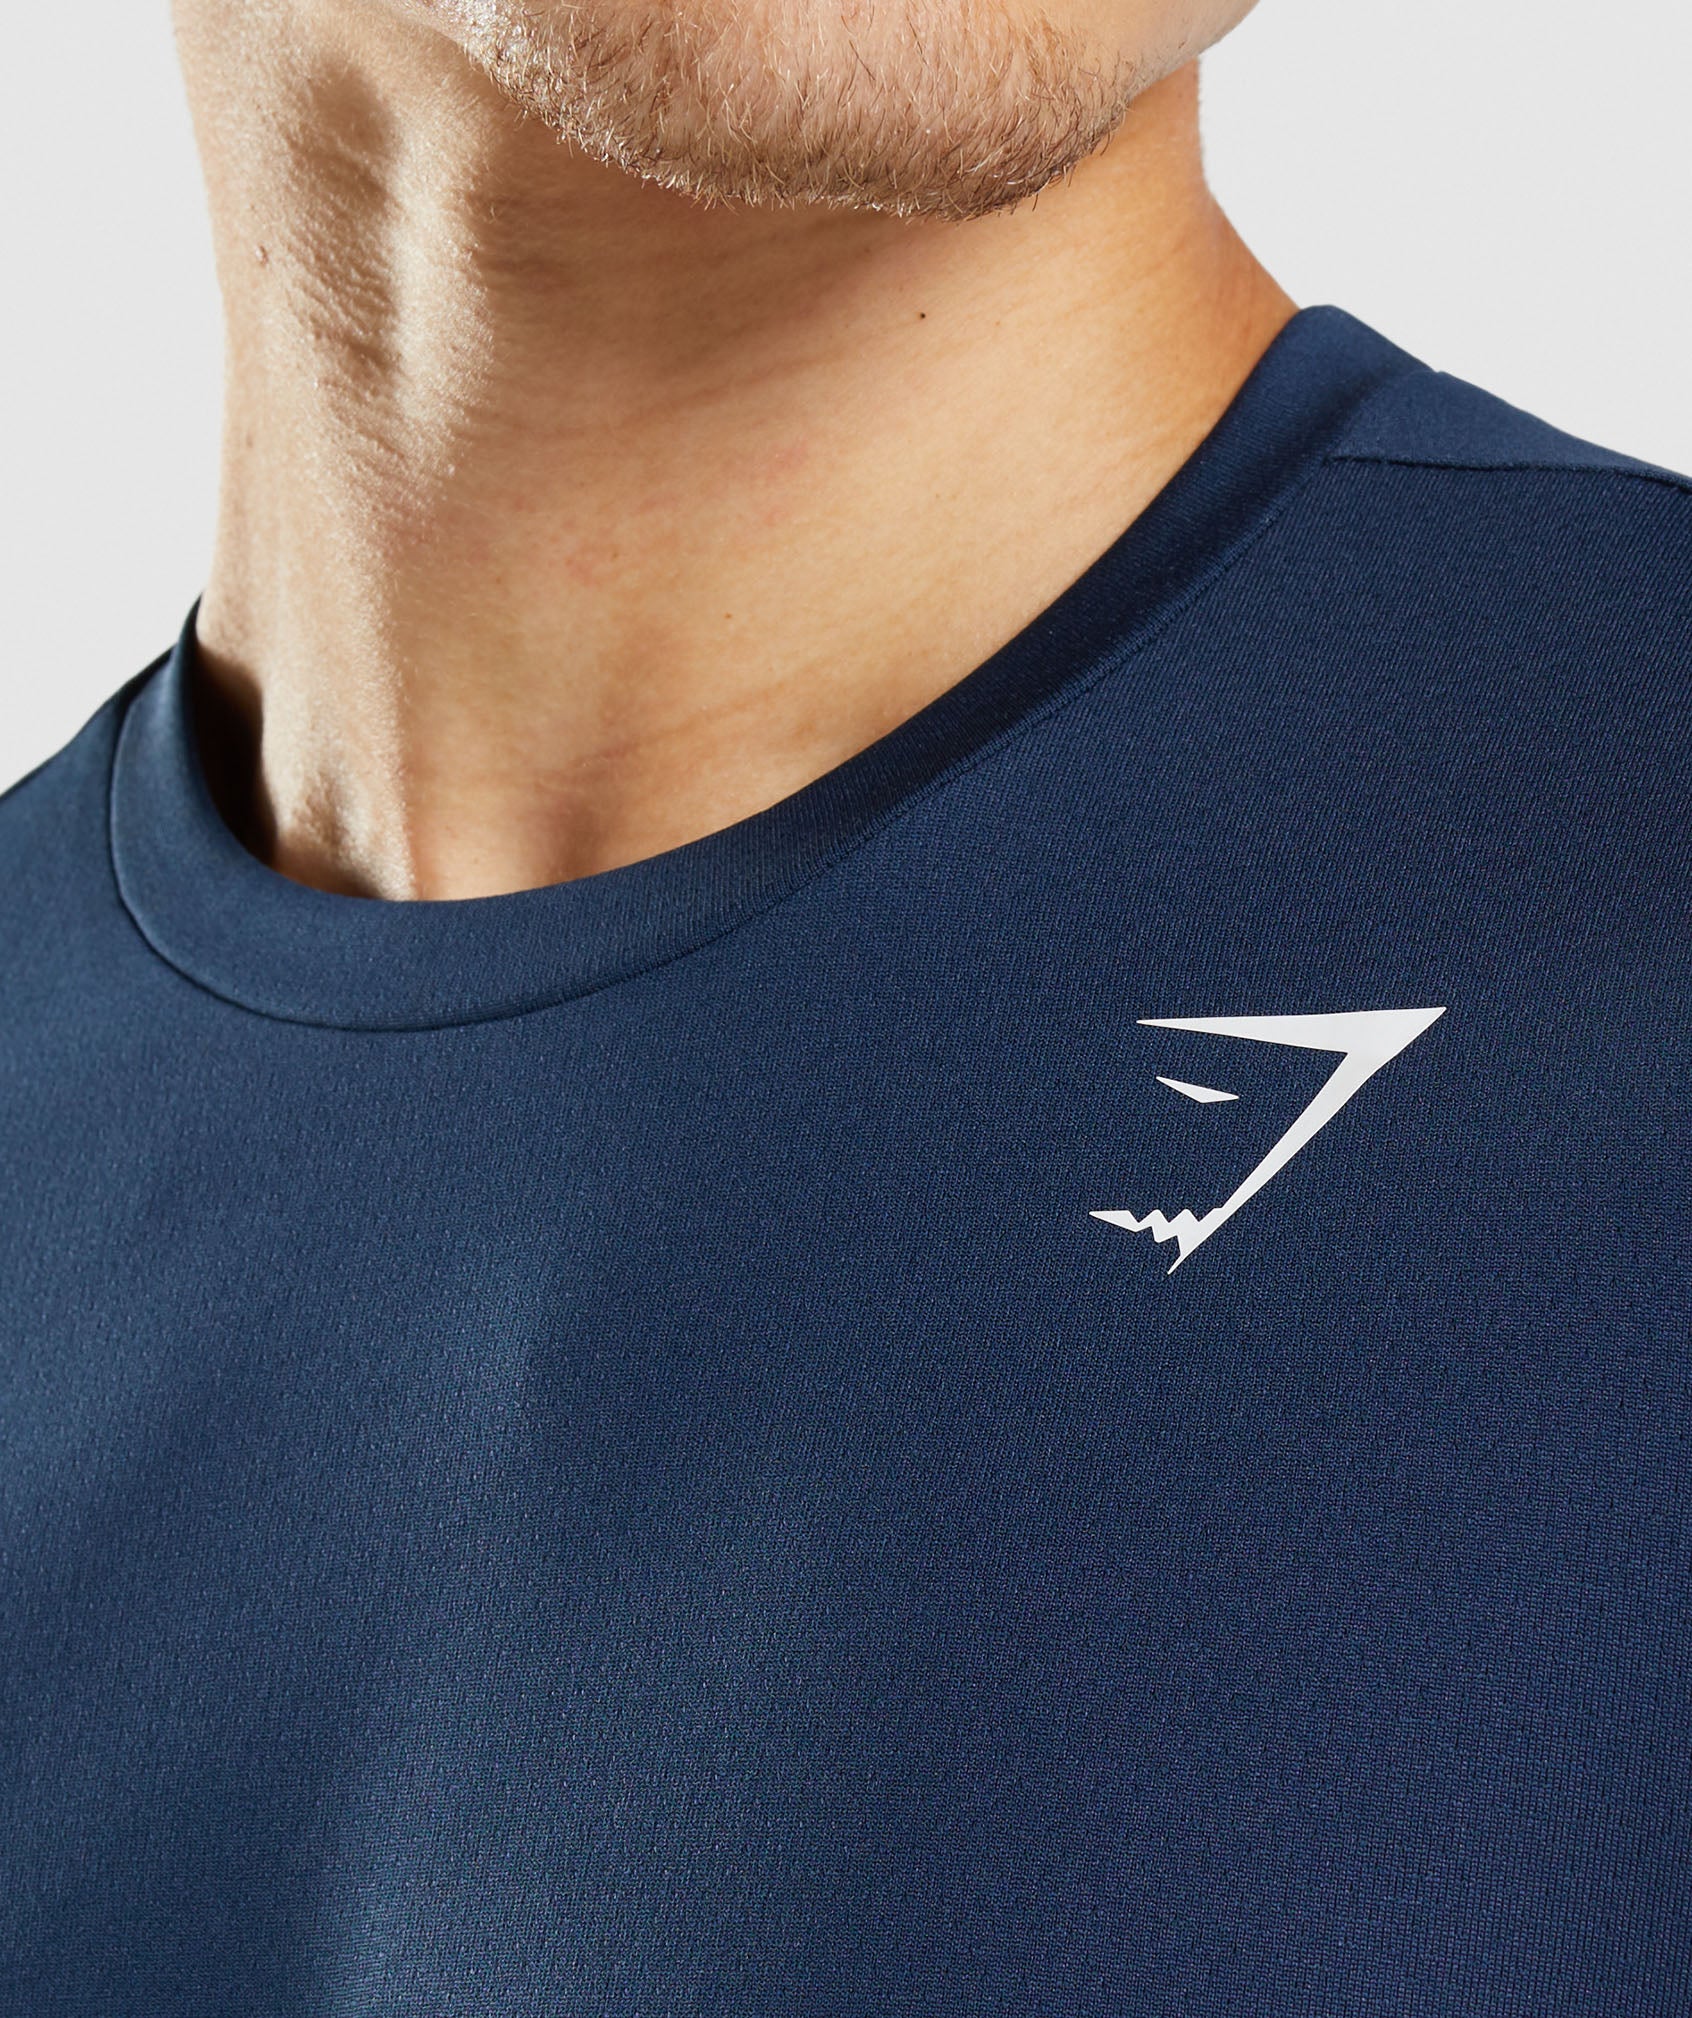 Arrival T-Shirt in Navy - view 6